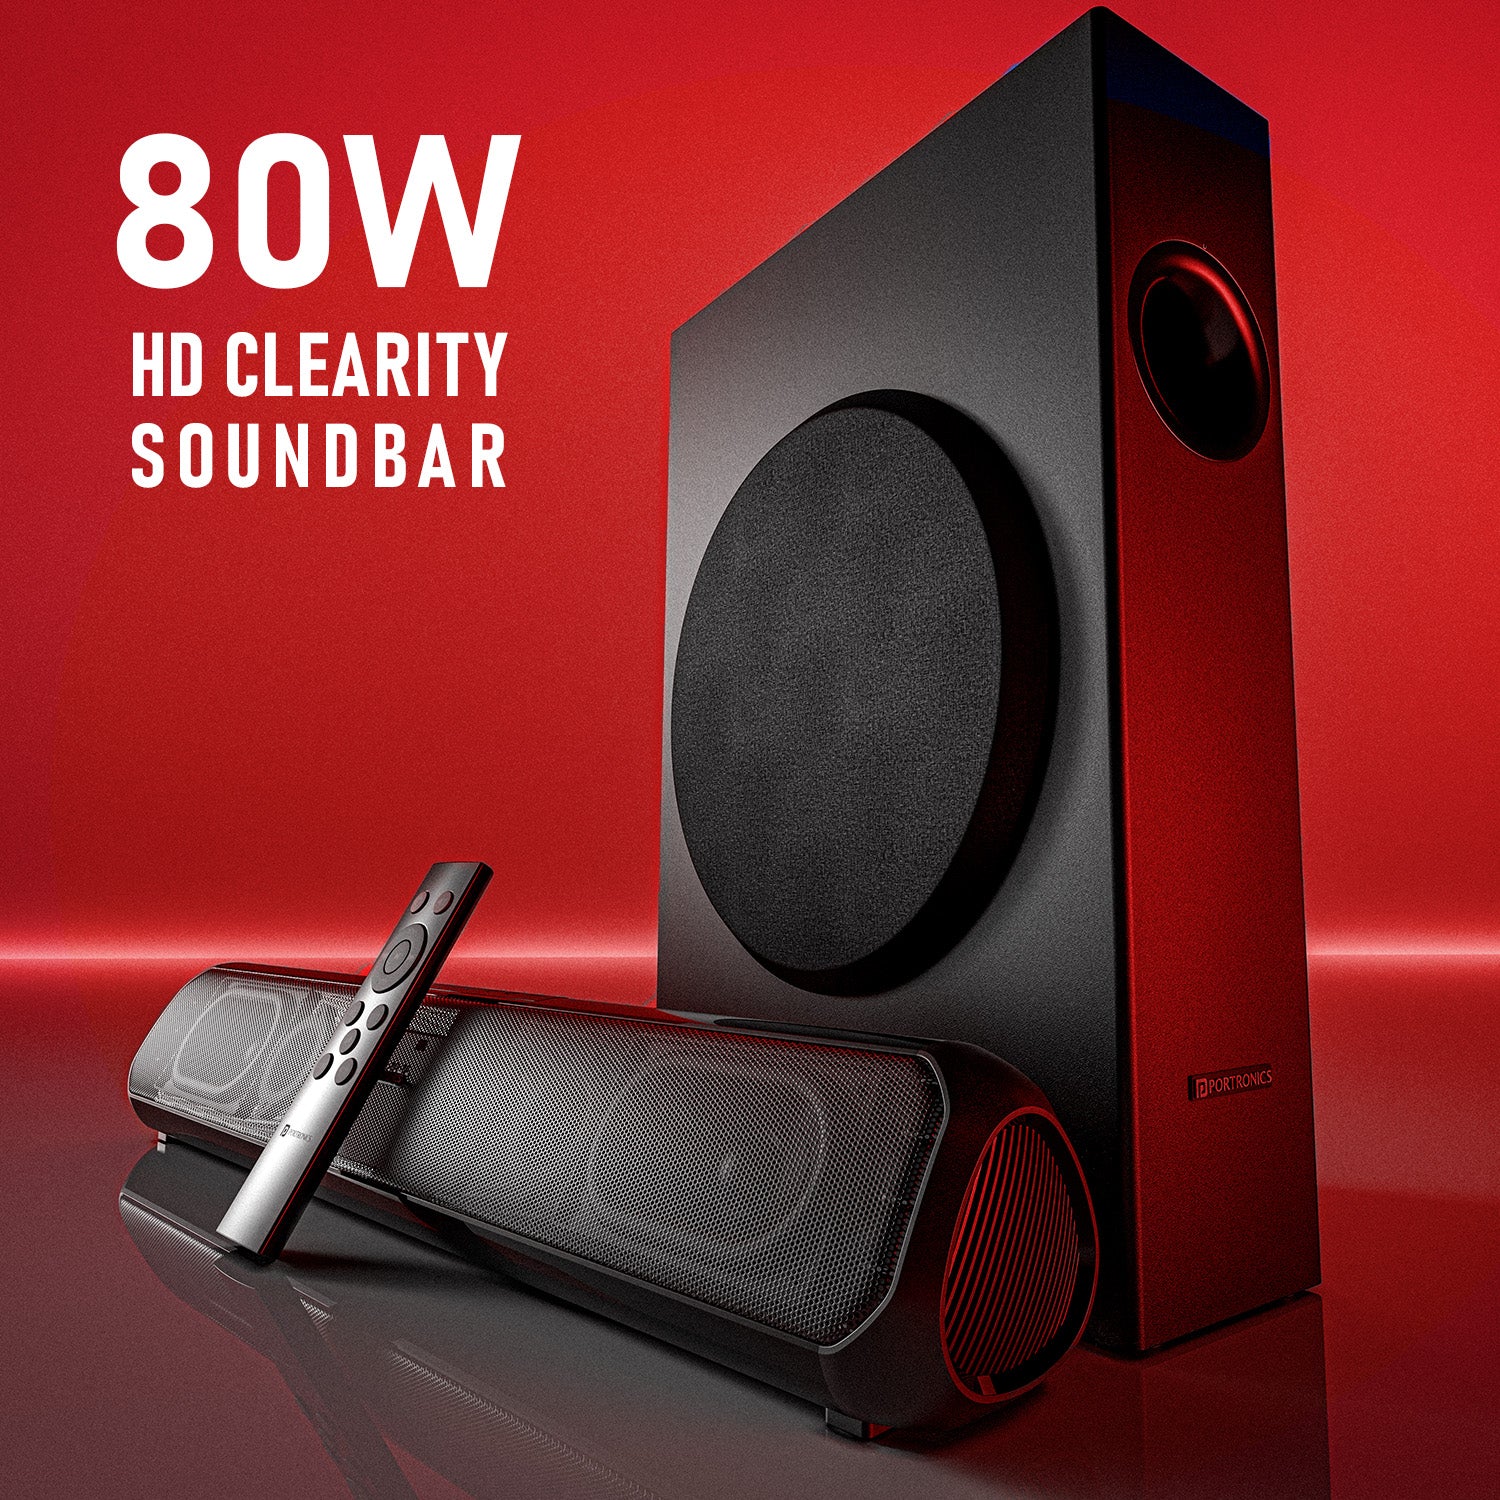 Portronics Pure Sound Pro 80w wireless soundbar with wired subwoofer for HD clear sound. black